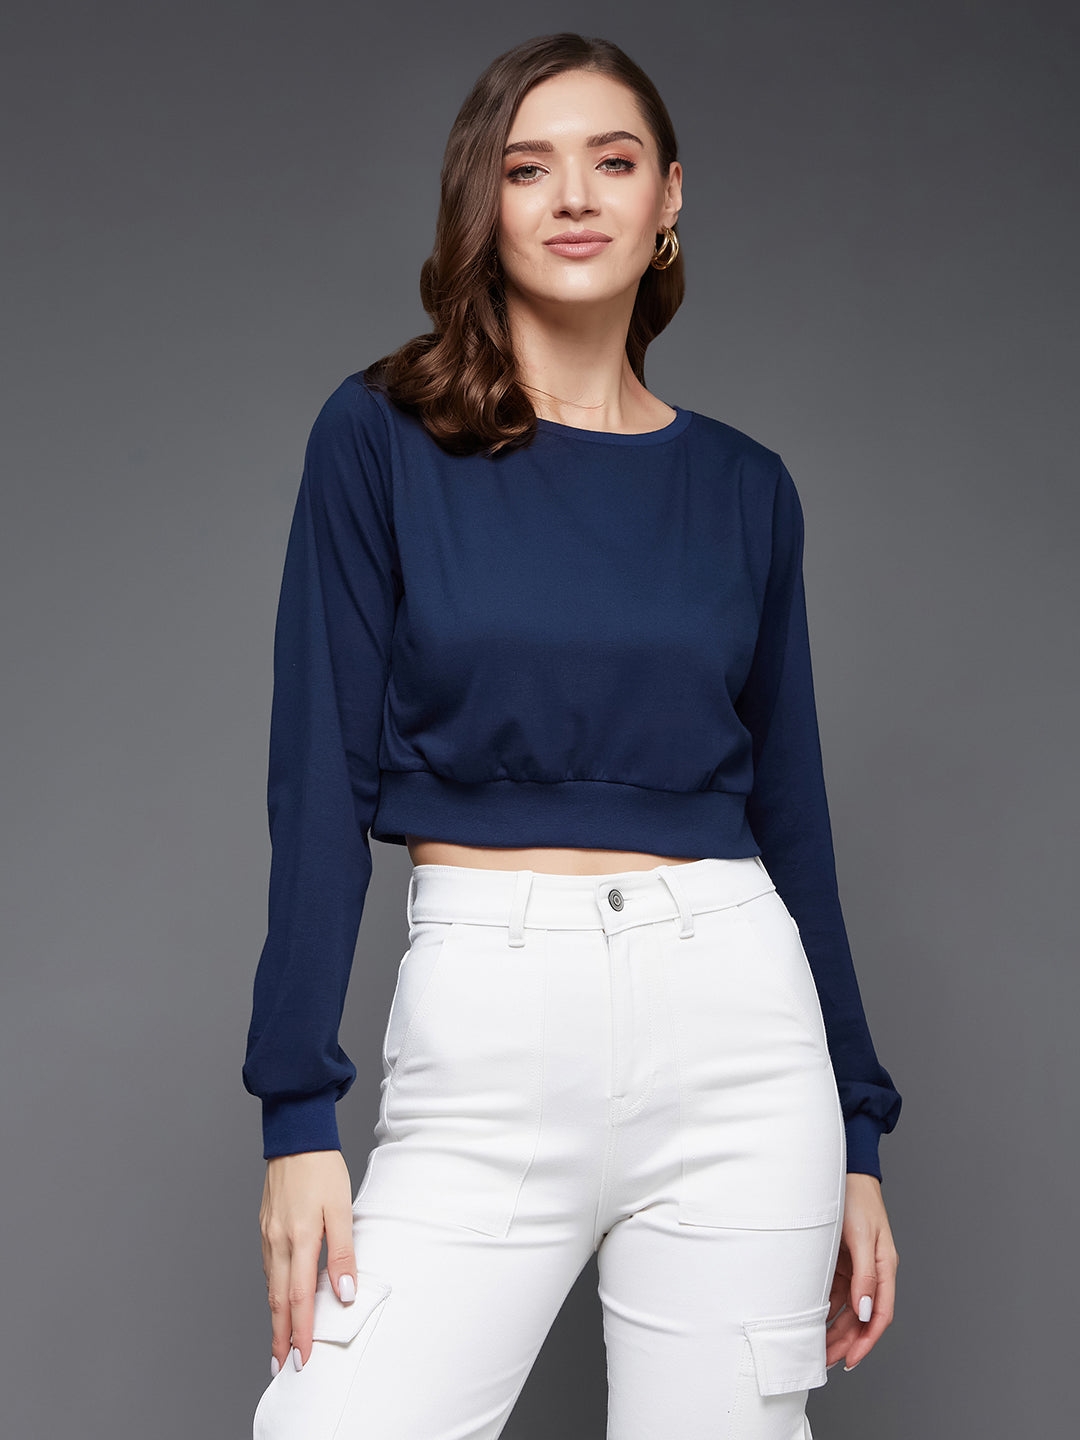 Navy Blue Round Neck Full Sleeves Solid Crop Top